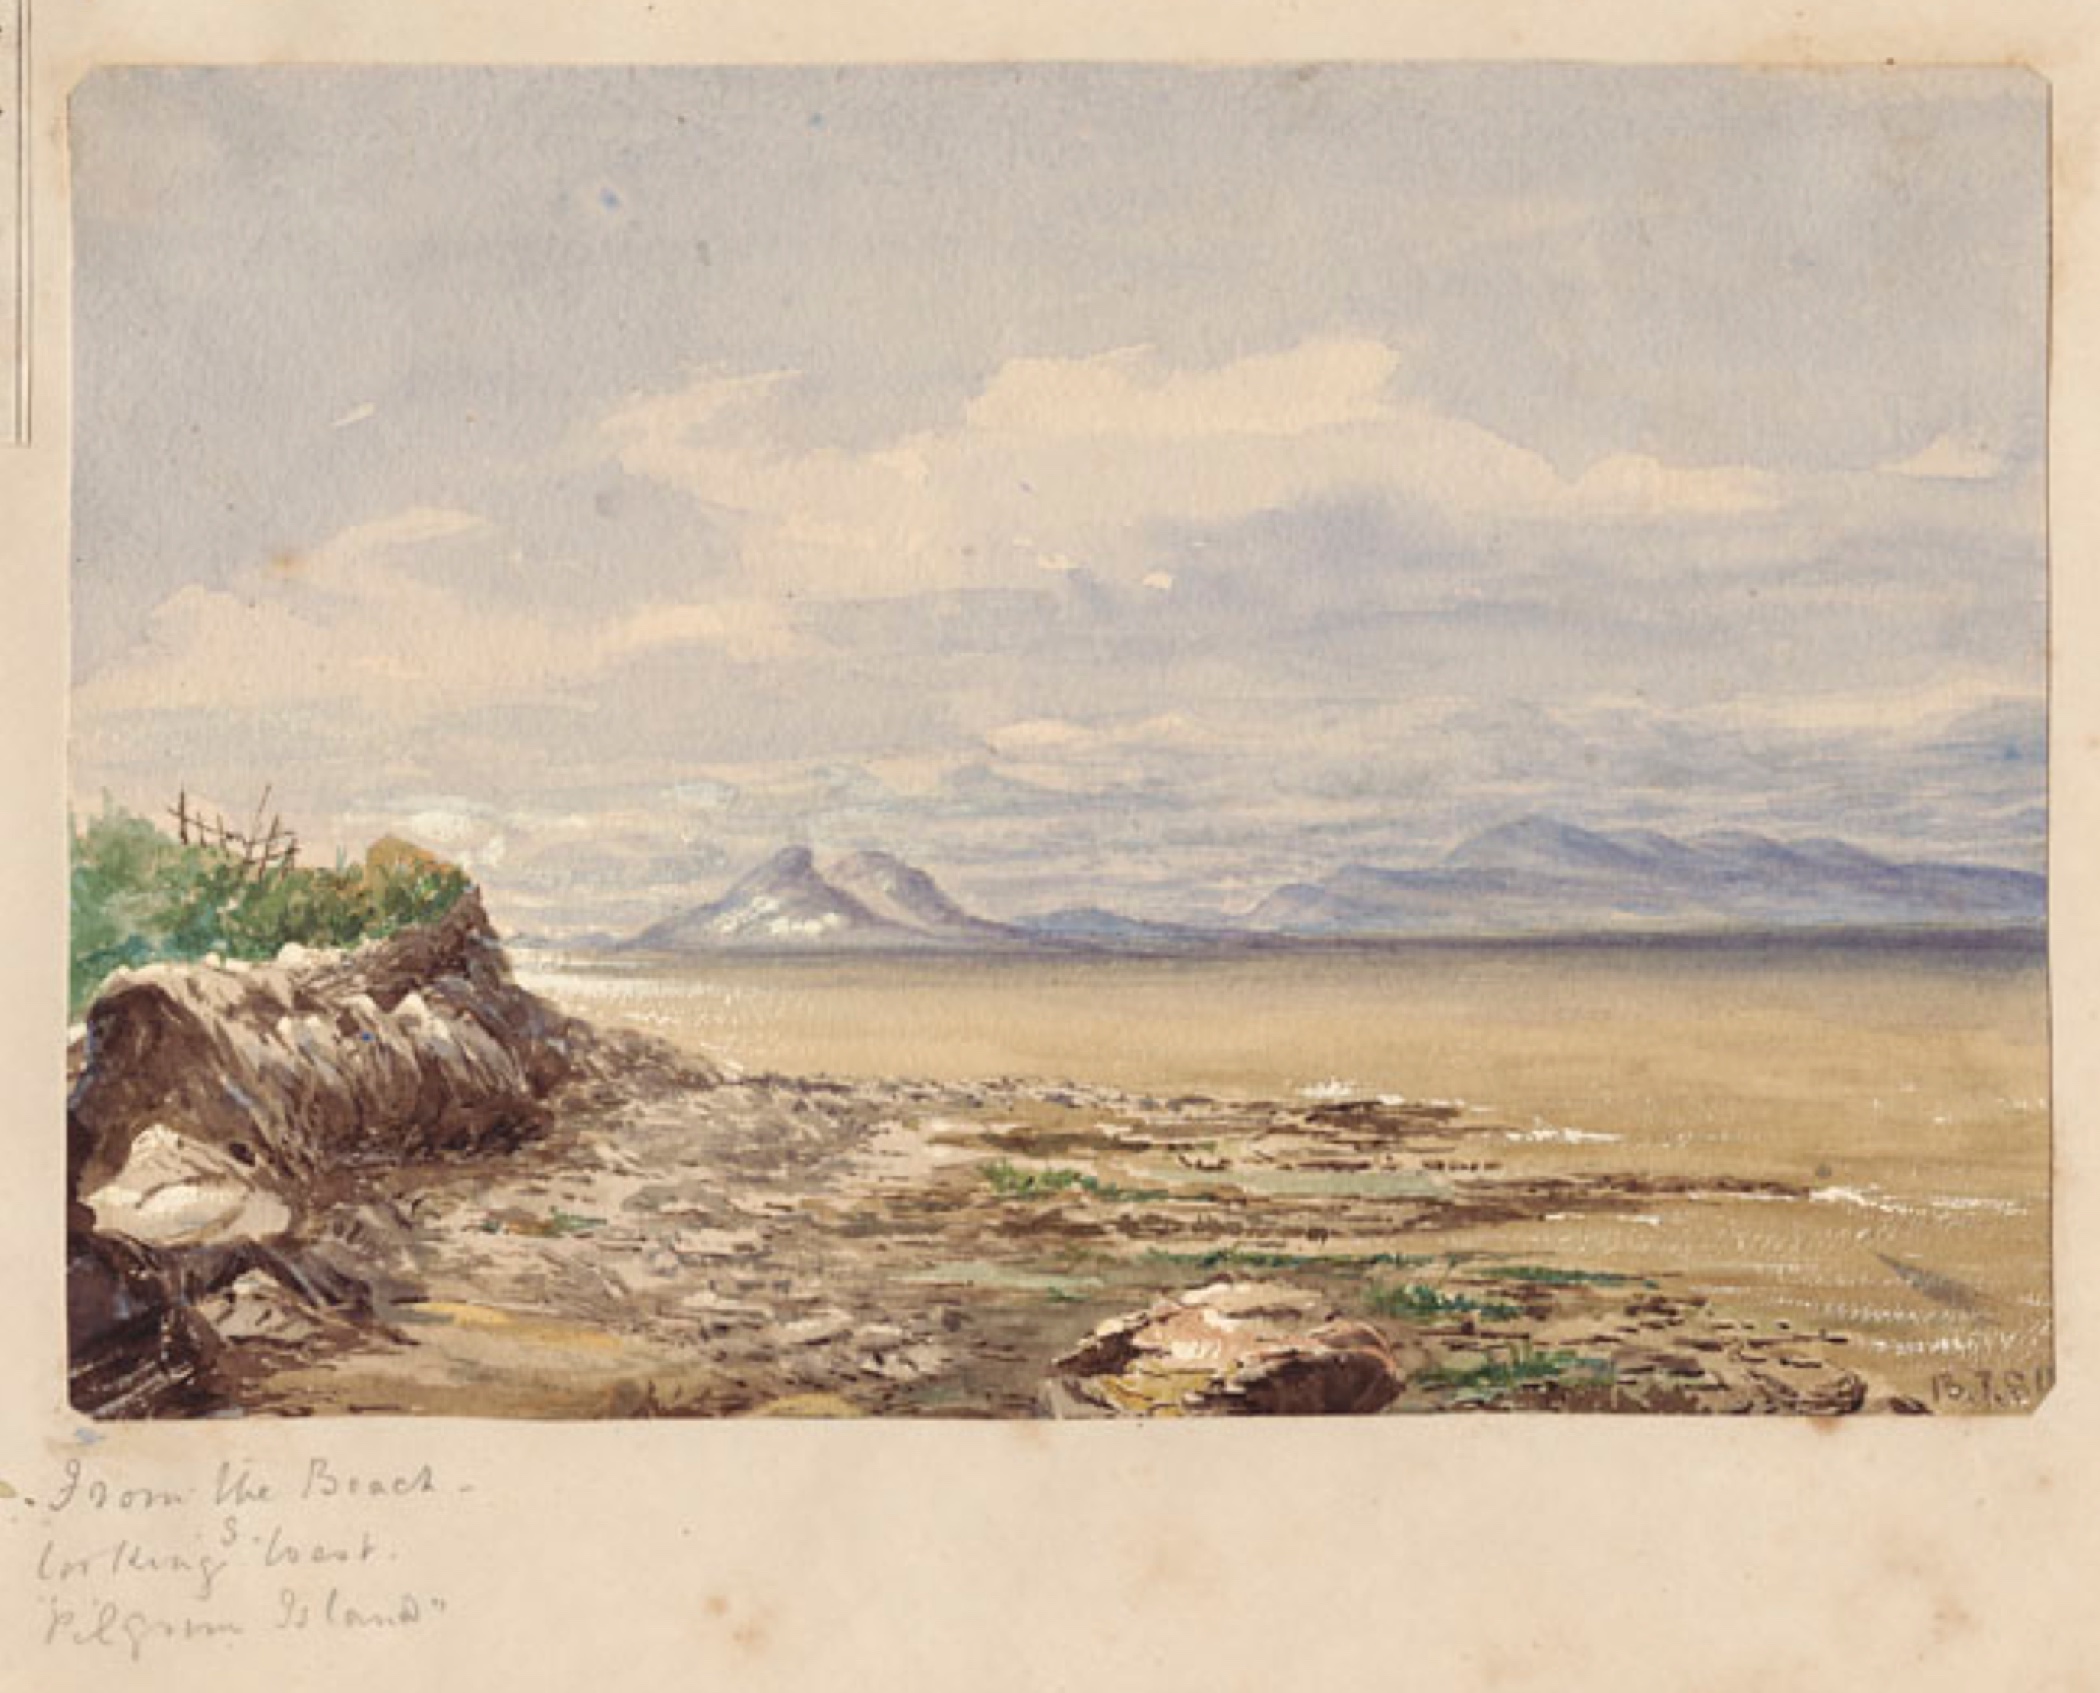 A pale watercolour of a riverside scene, with a rocky outcrop, gentle waves, with hills and islands in the distance, under a semi-clouded sky.